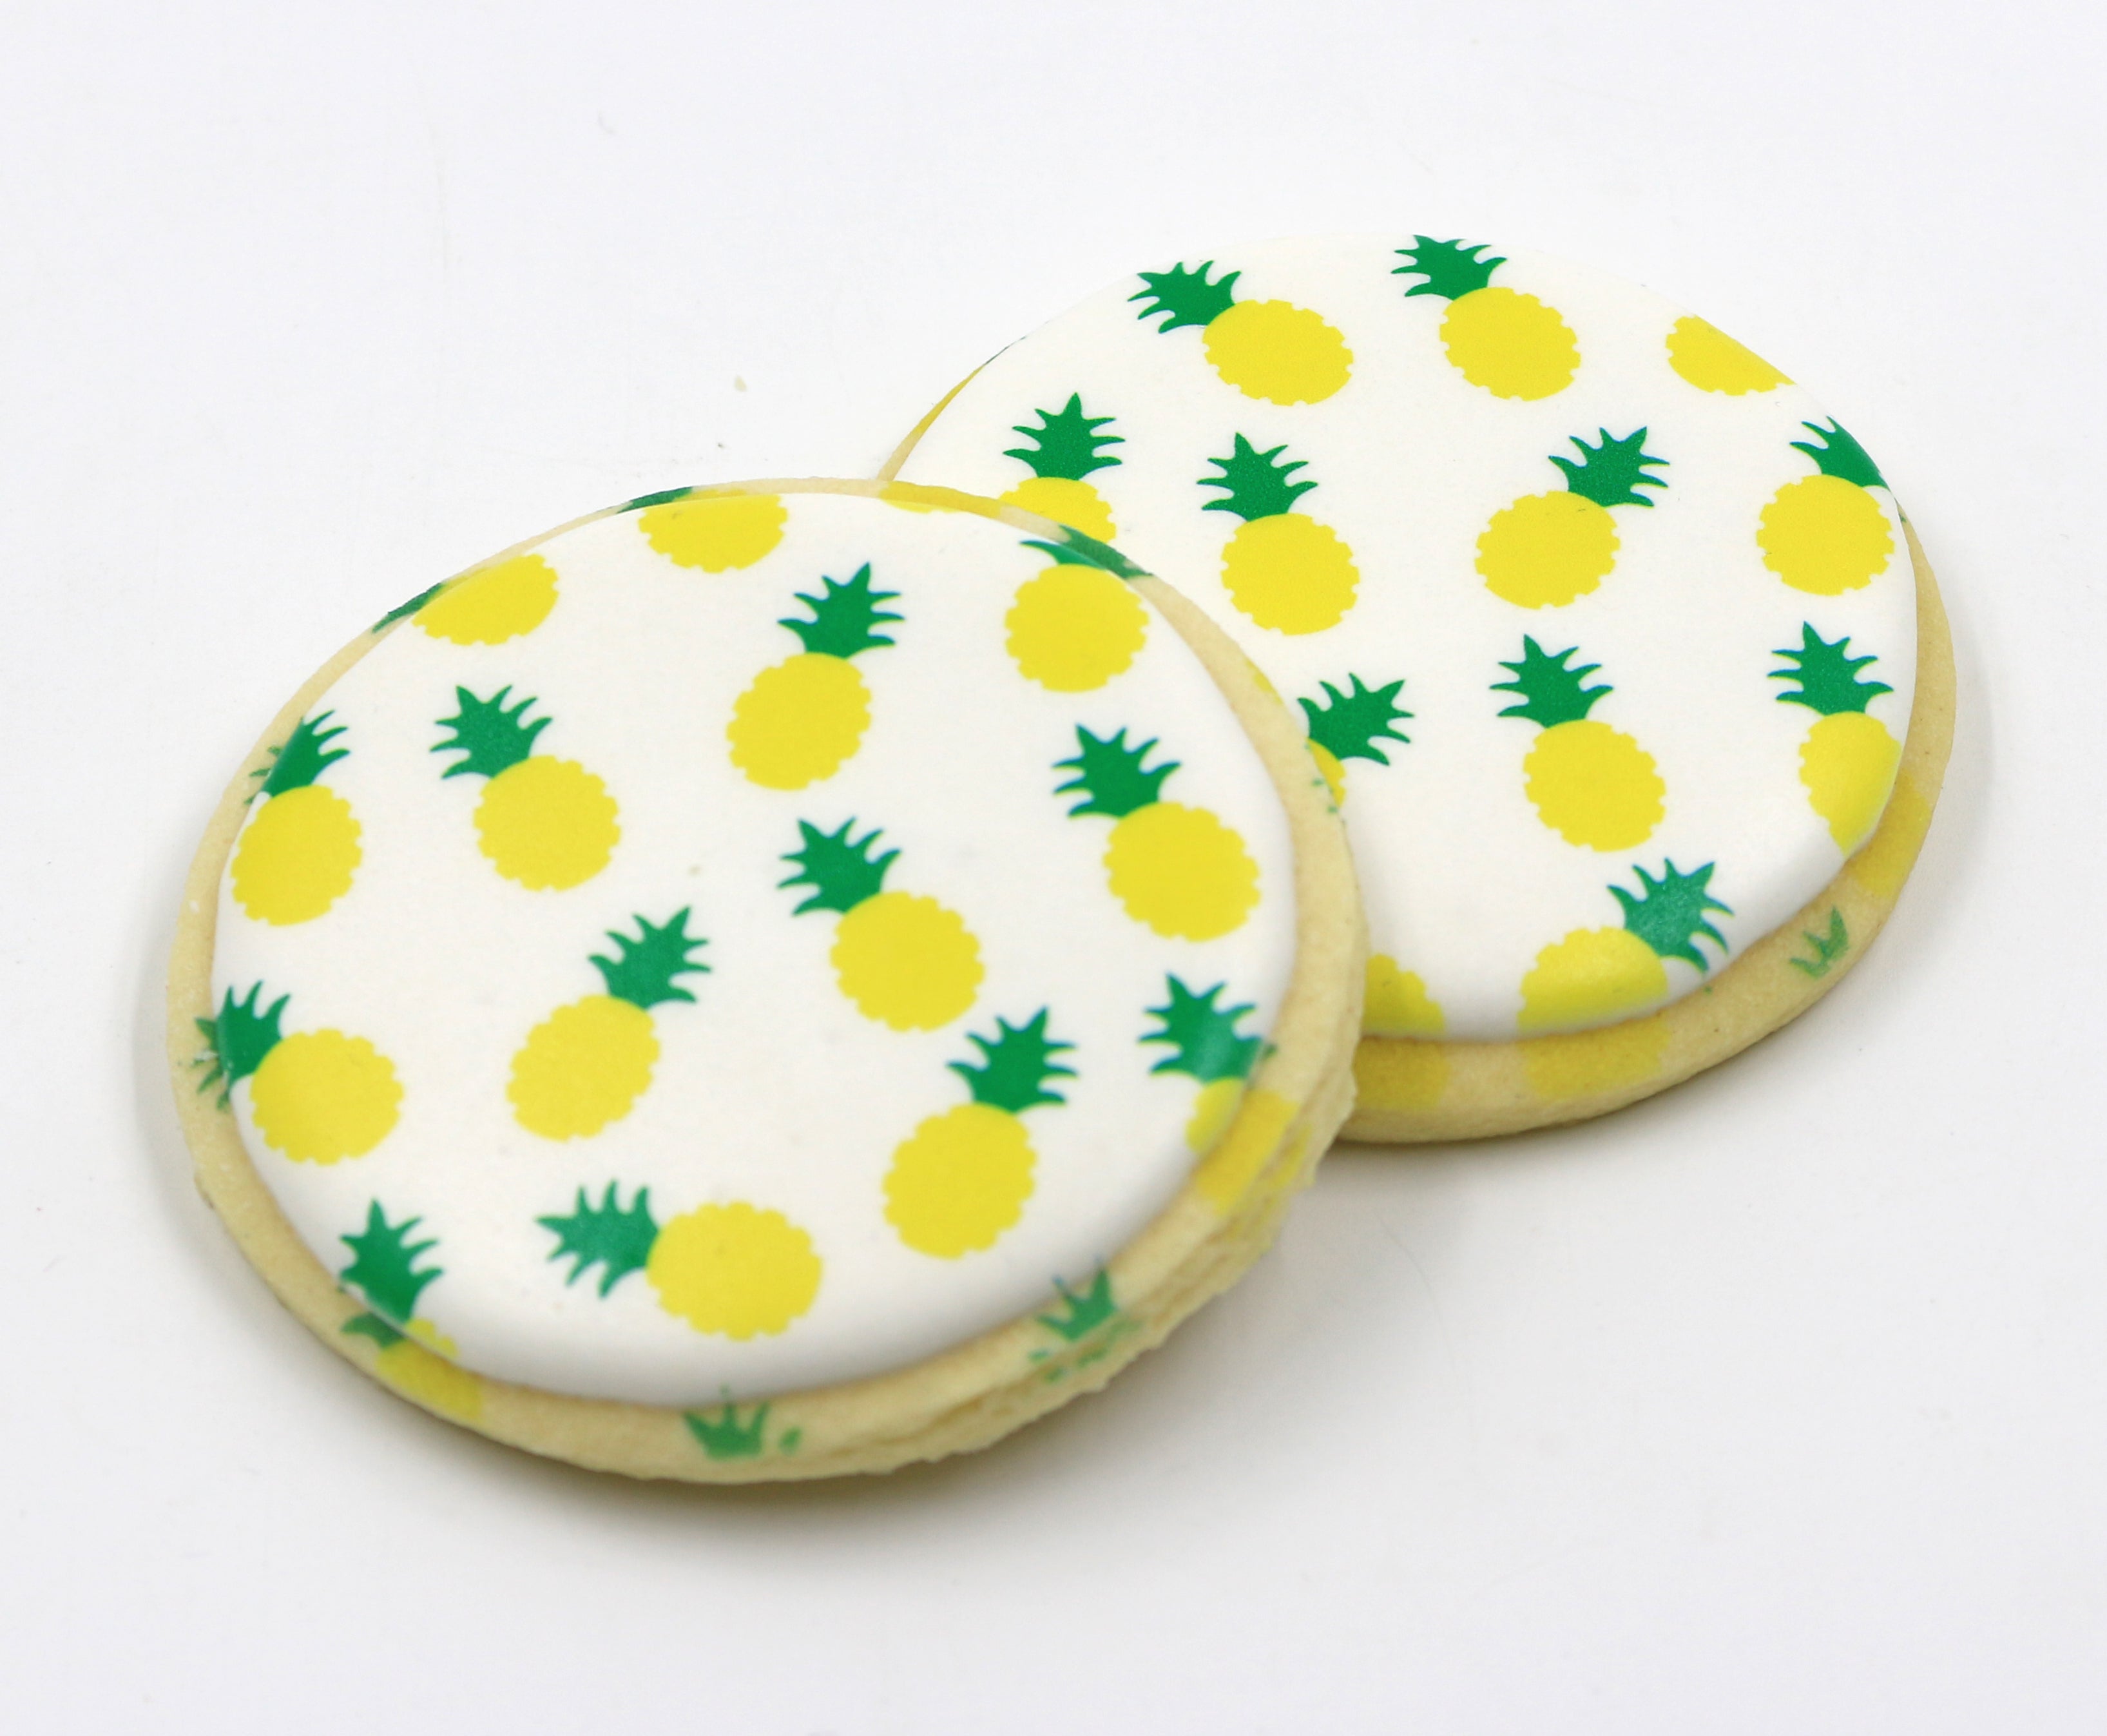 2 Piece Stencil set, Pineapple Cookie Stencil and Royal Icing